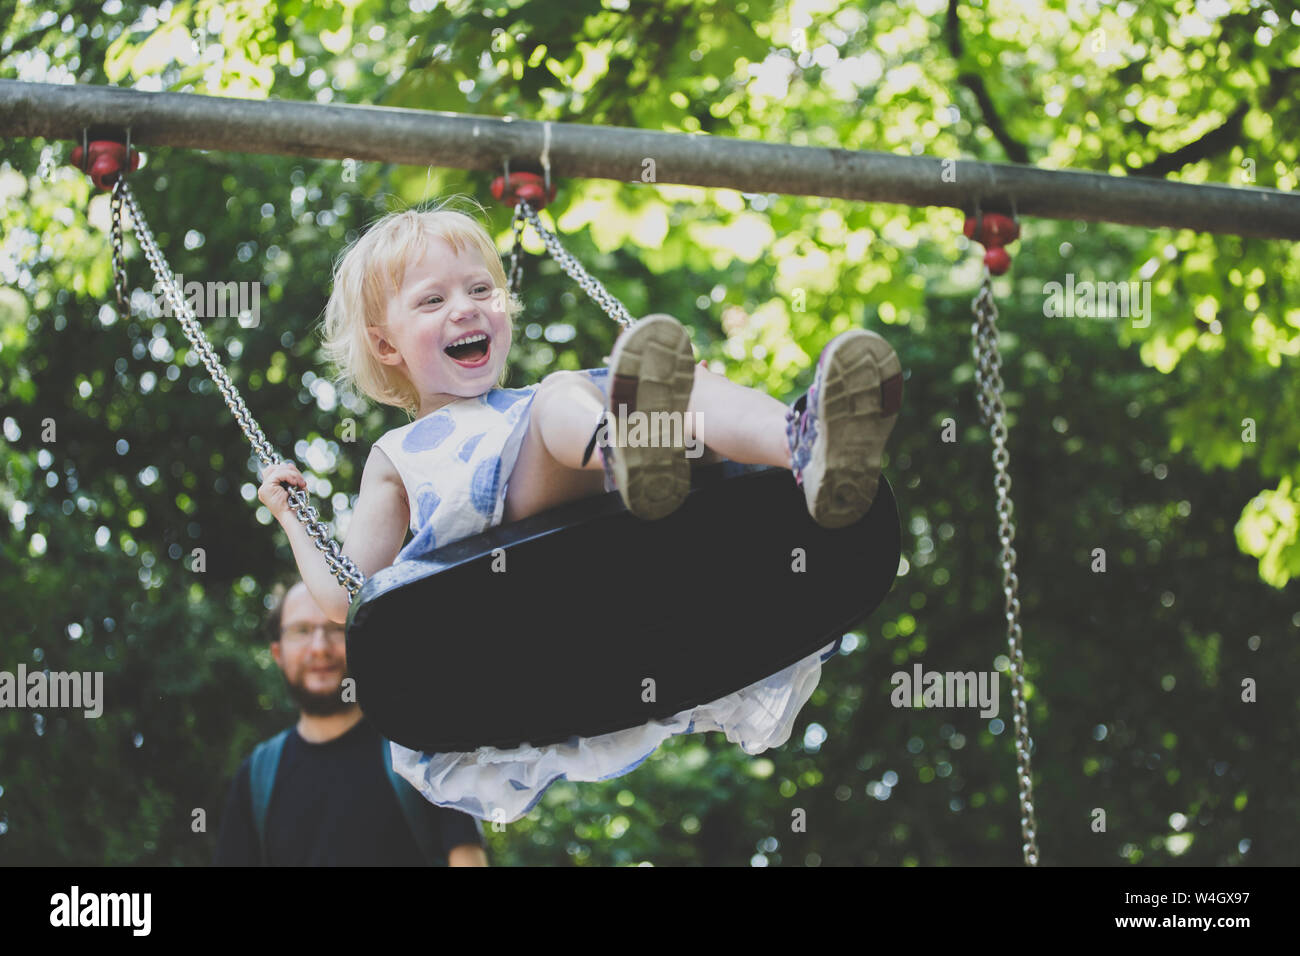 Portrait of happy ltiitle girl on a swing Stock Photo